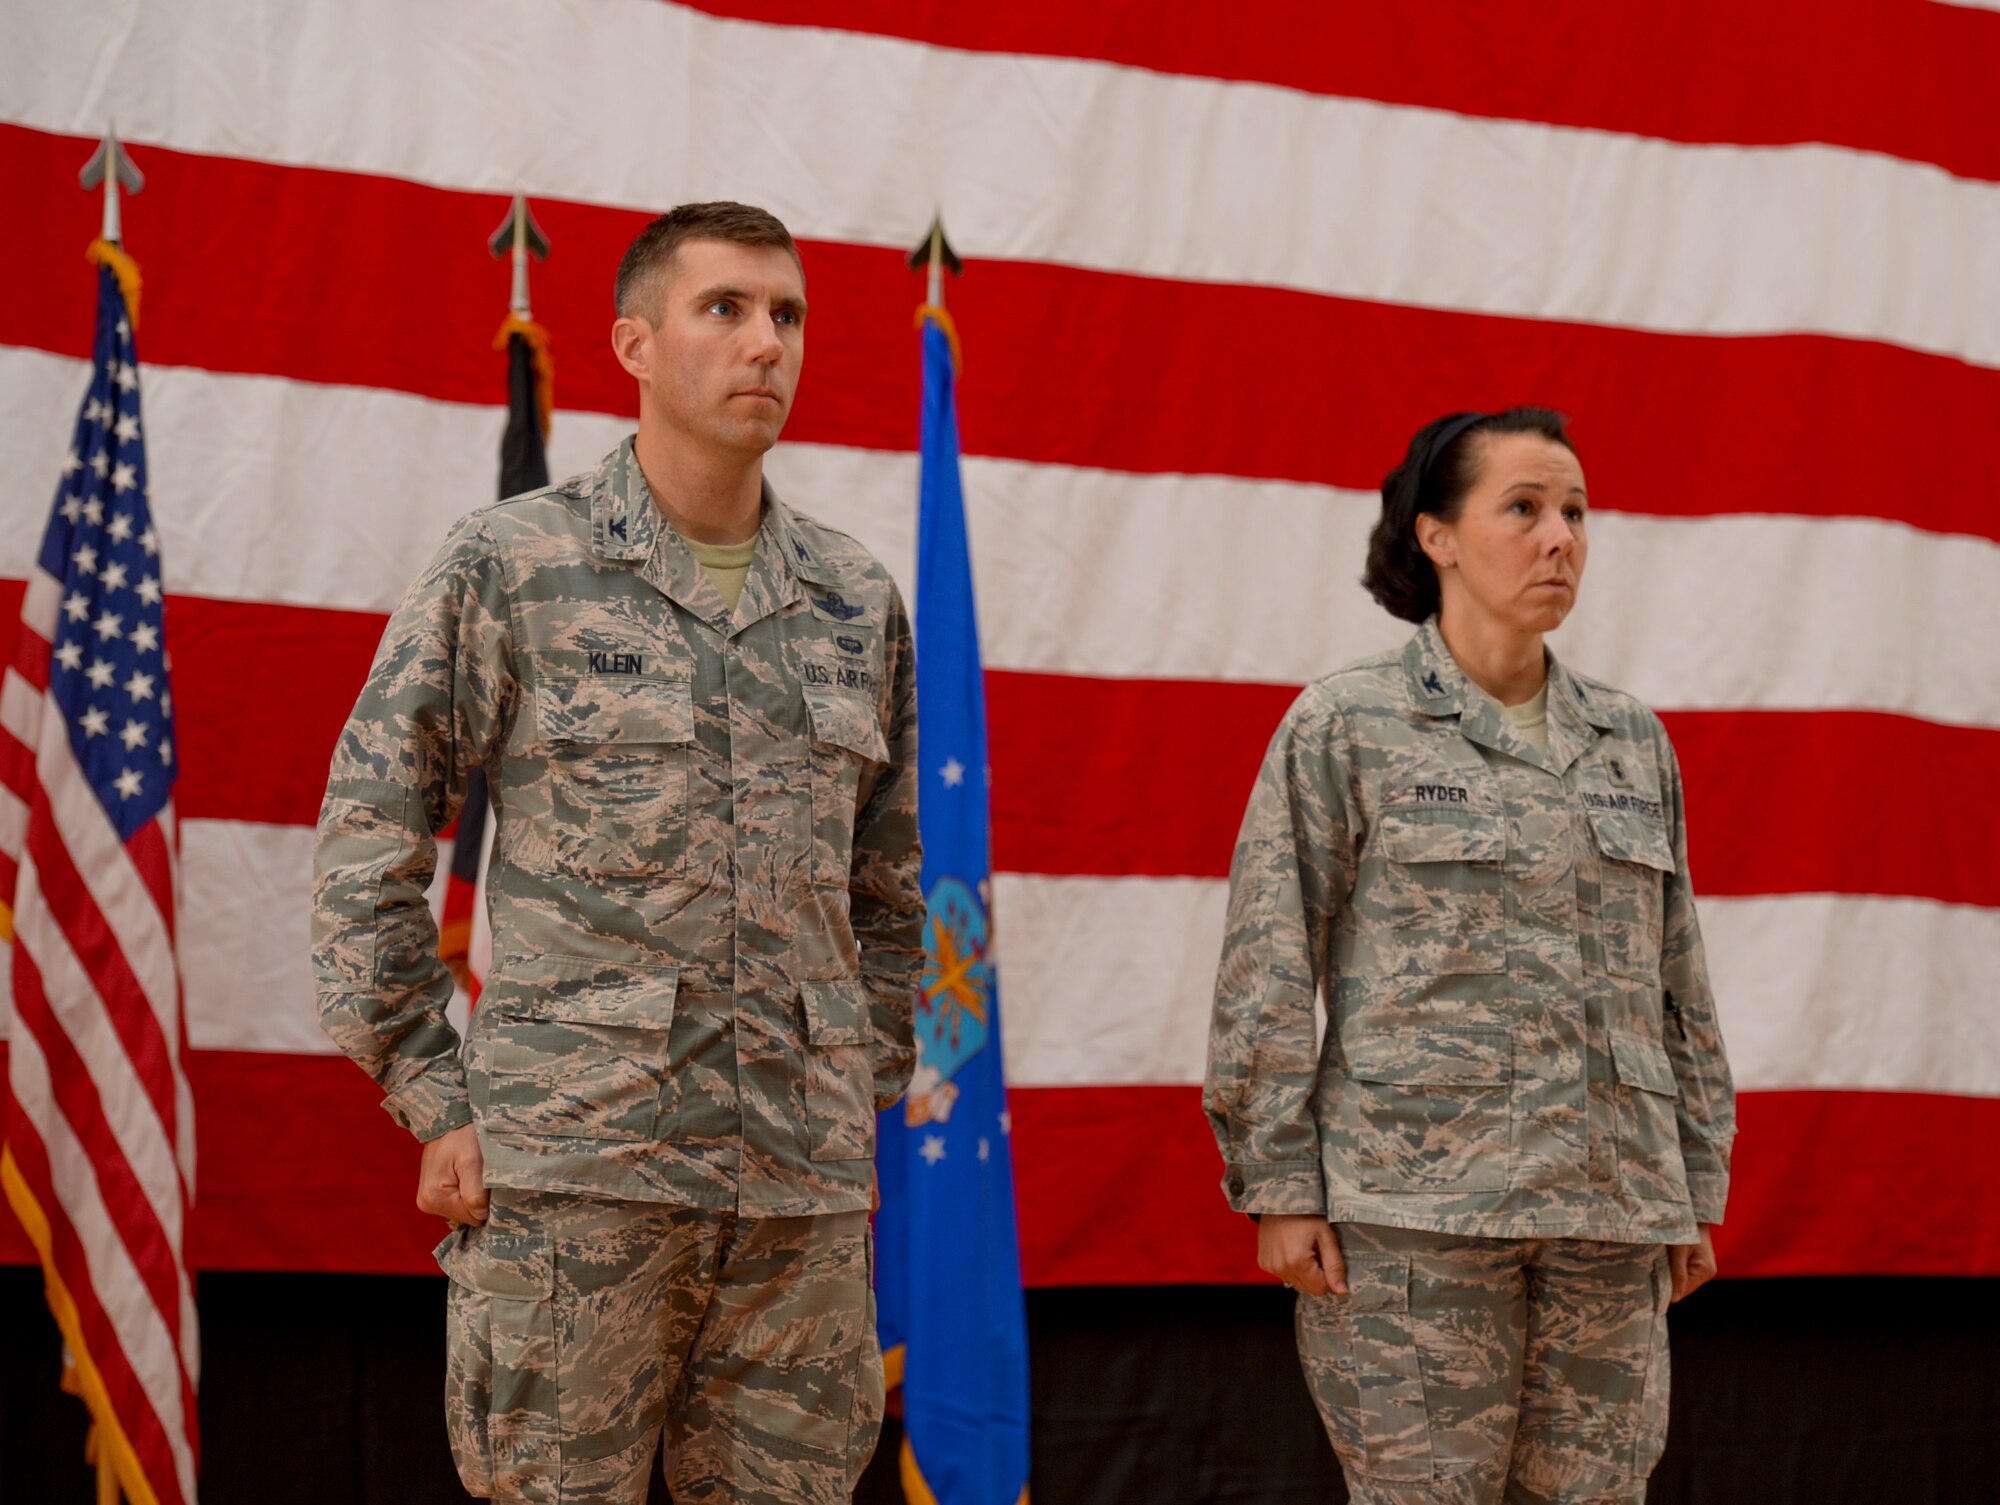 Col. John Klein, 386th Air Expeditionary Wing commander, and Col. Jeannine Ryder, 386th Expeditionary Medical Group commander, stand at attention during a Bronze Star citation reading. Ryder was awarded the medal just before relinquishing command of the 386th EMDG during a change of command ceremony June 8, 2014. (U.S. Air Force photo by Staff Sgt. Jeremy Bowcock)